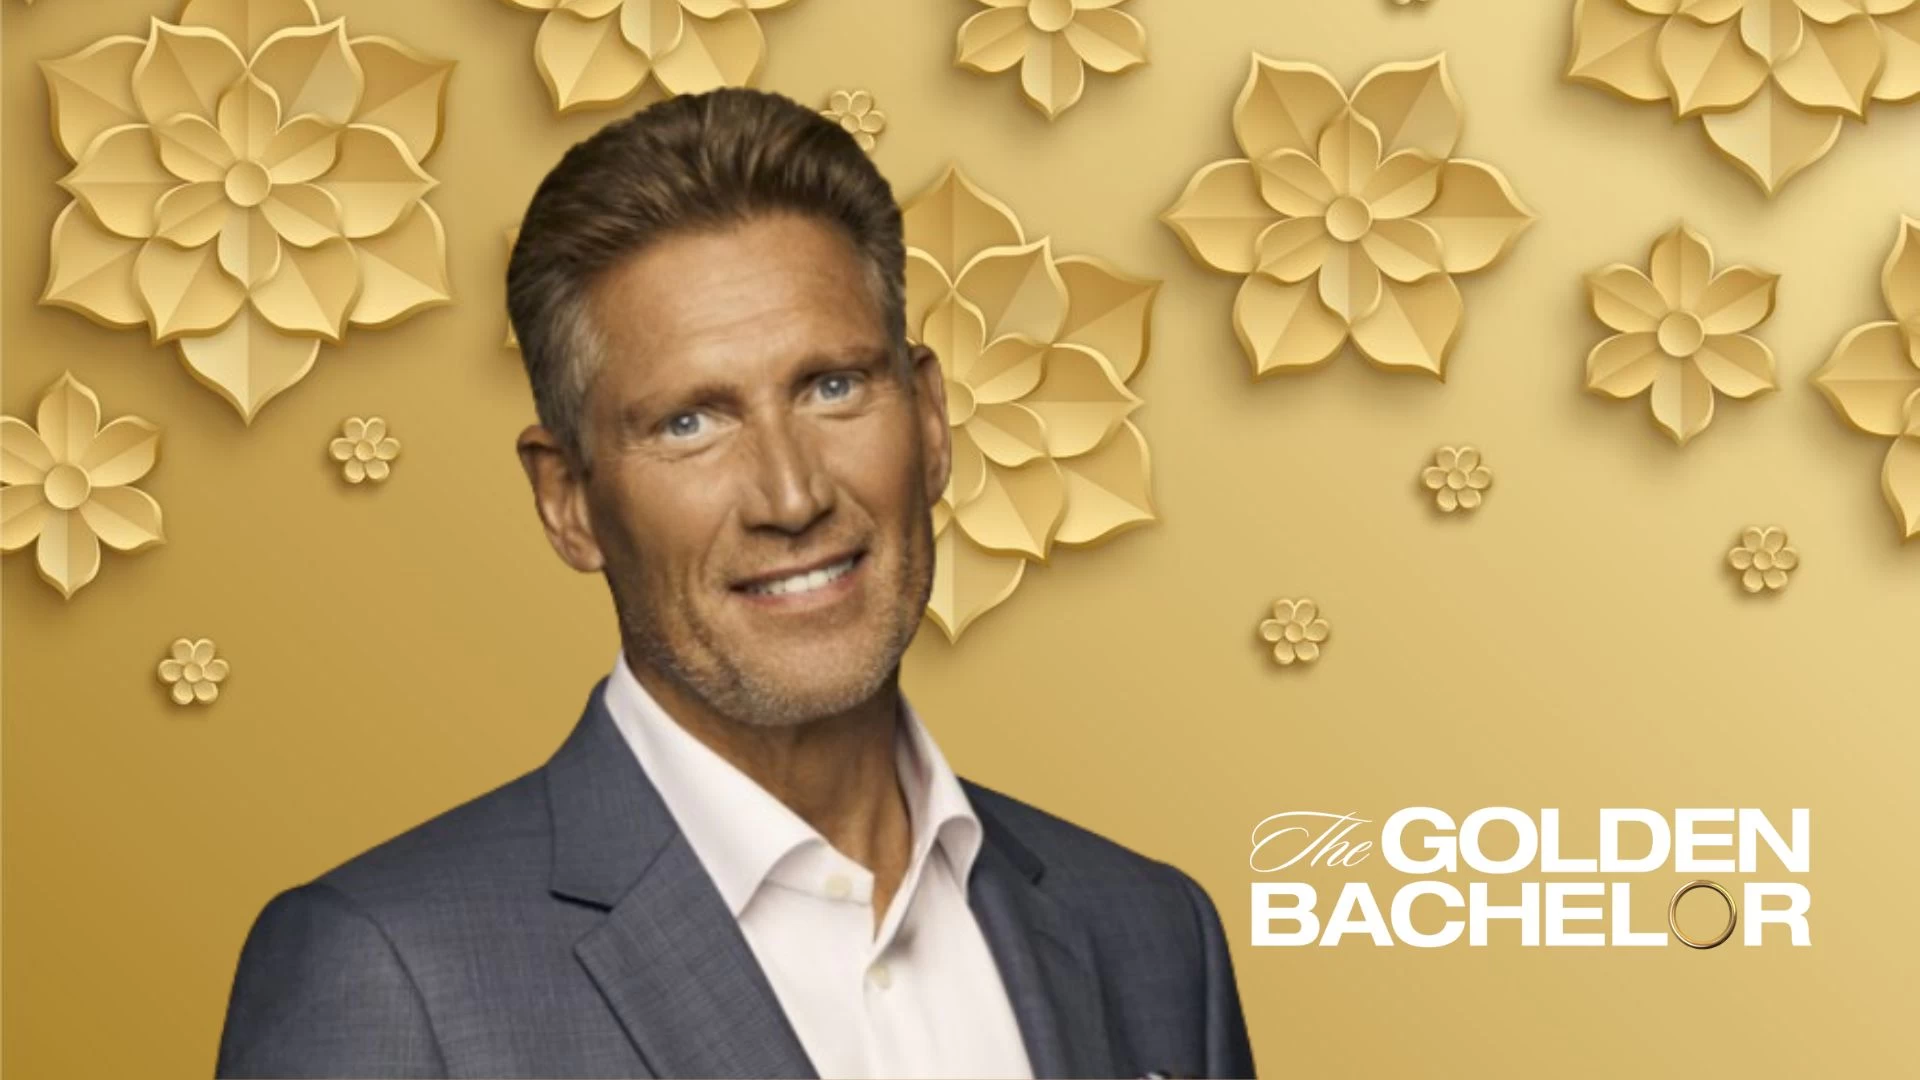 What Channel is the Golden Bachelor on Tonight? Does the Golden Bachelor Find Love? How Old is the Golden Bachelor? When is the Golden Bachelor this Week?